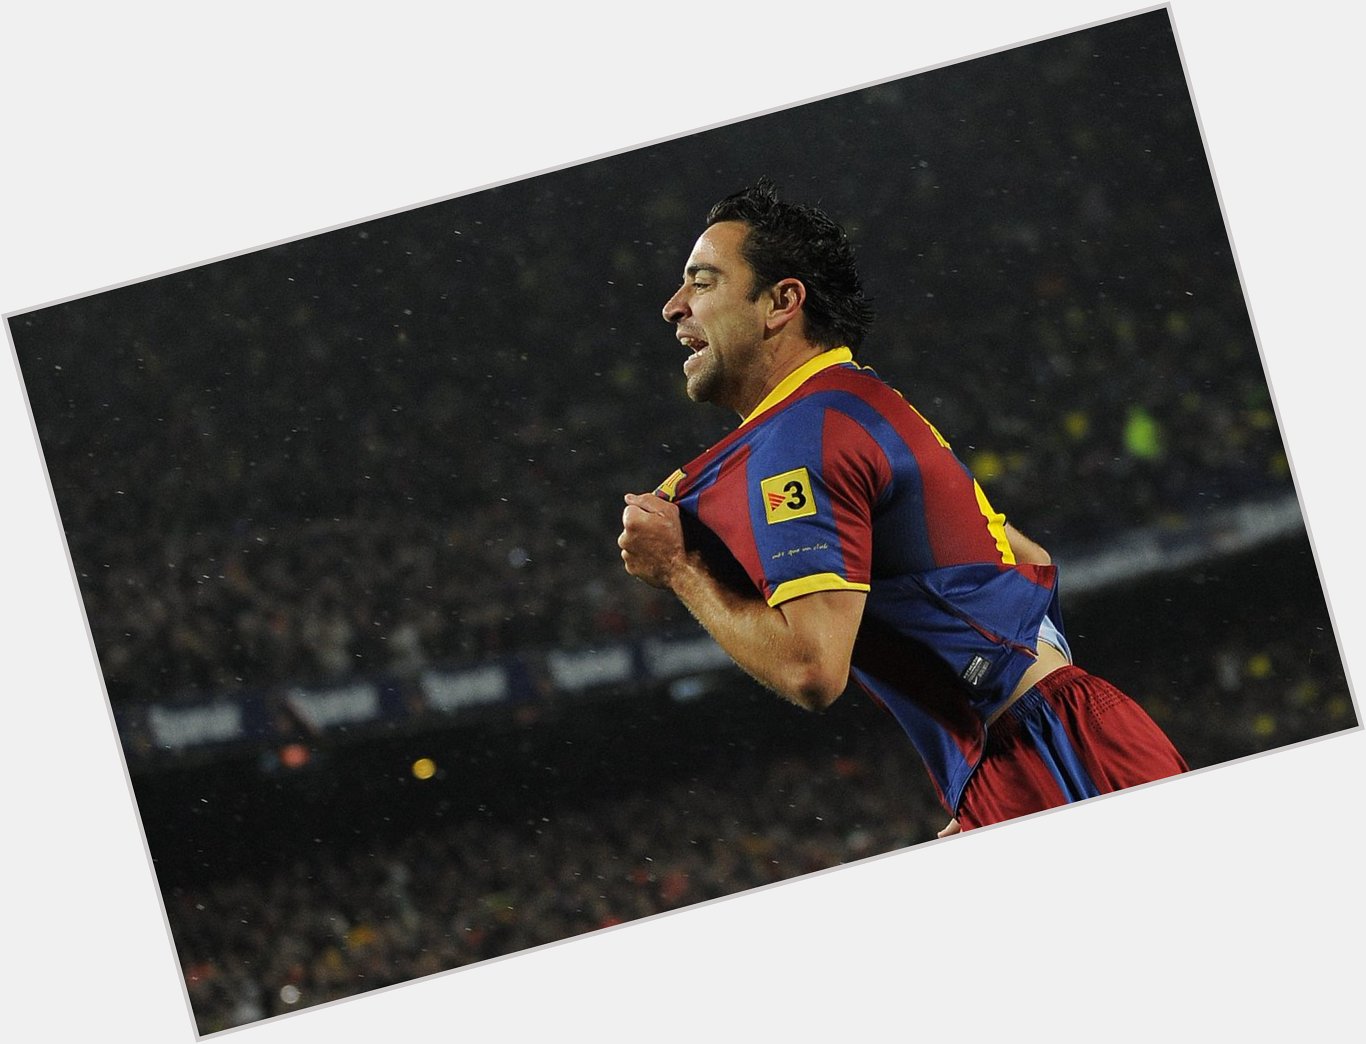 Happy 41st birthday to one of the greatest legends of the game, Xavi Hernández. 